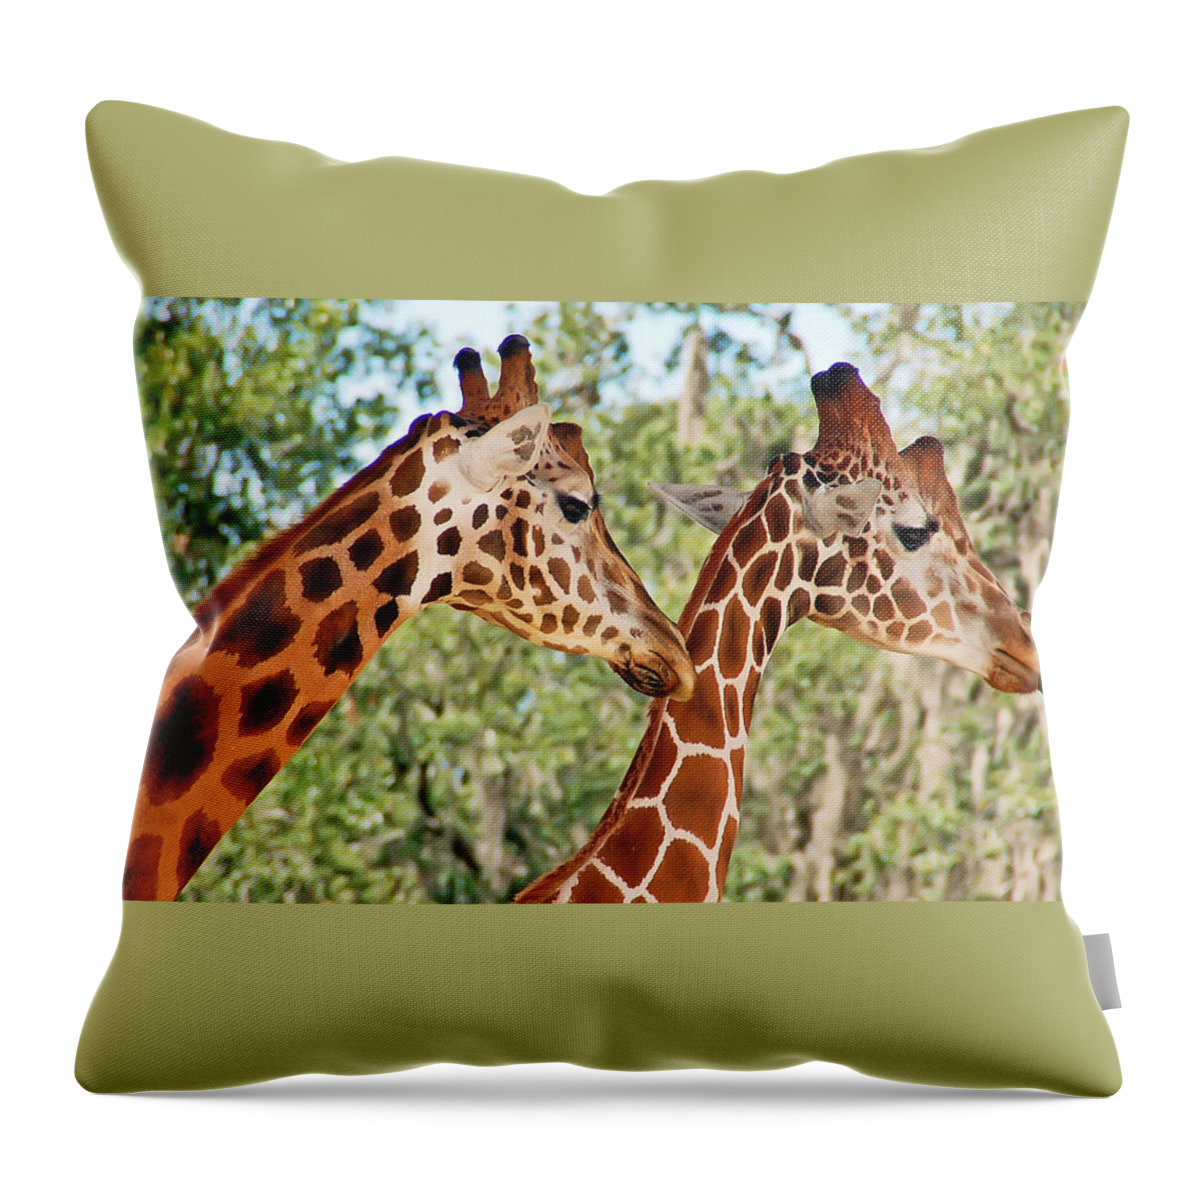 Giraffe Throw Pillow featuring the photograph Two Giraffes by Aimee L Maher ALM GALLERY